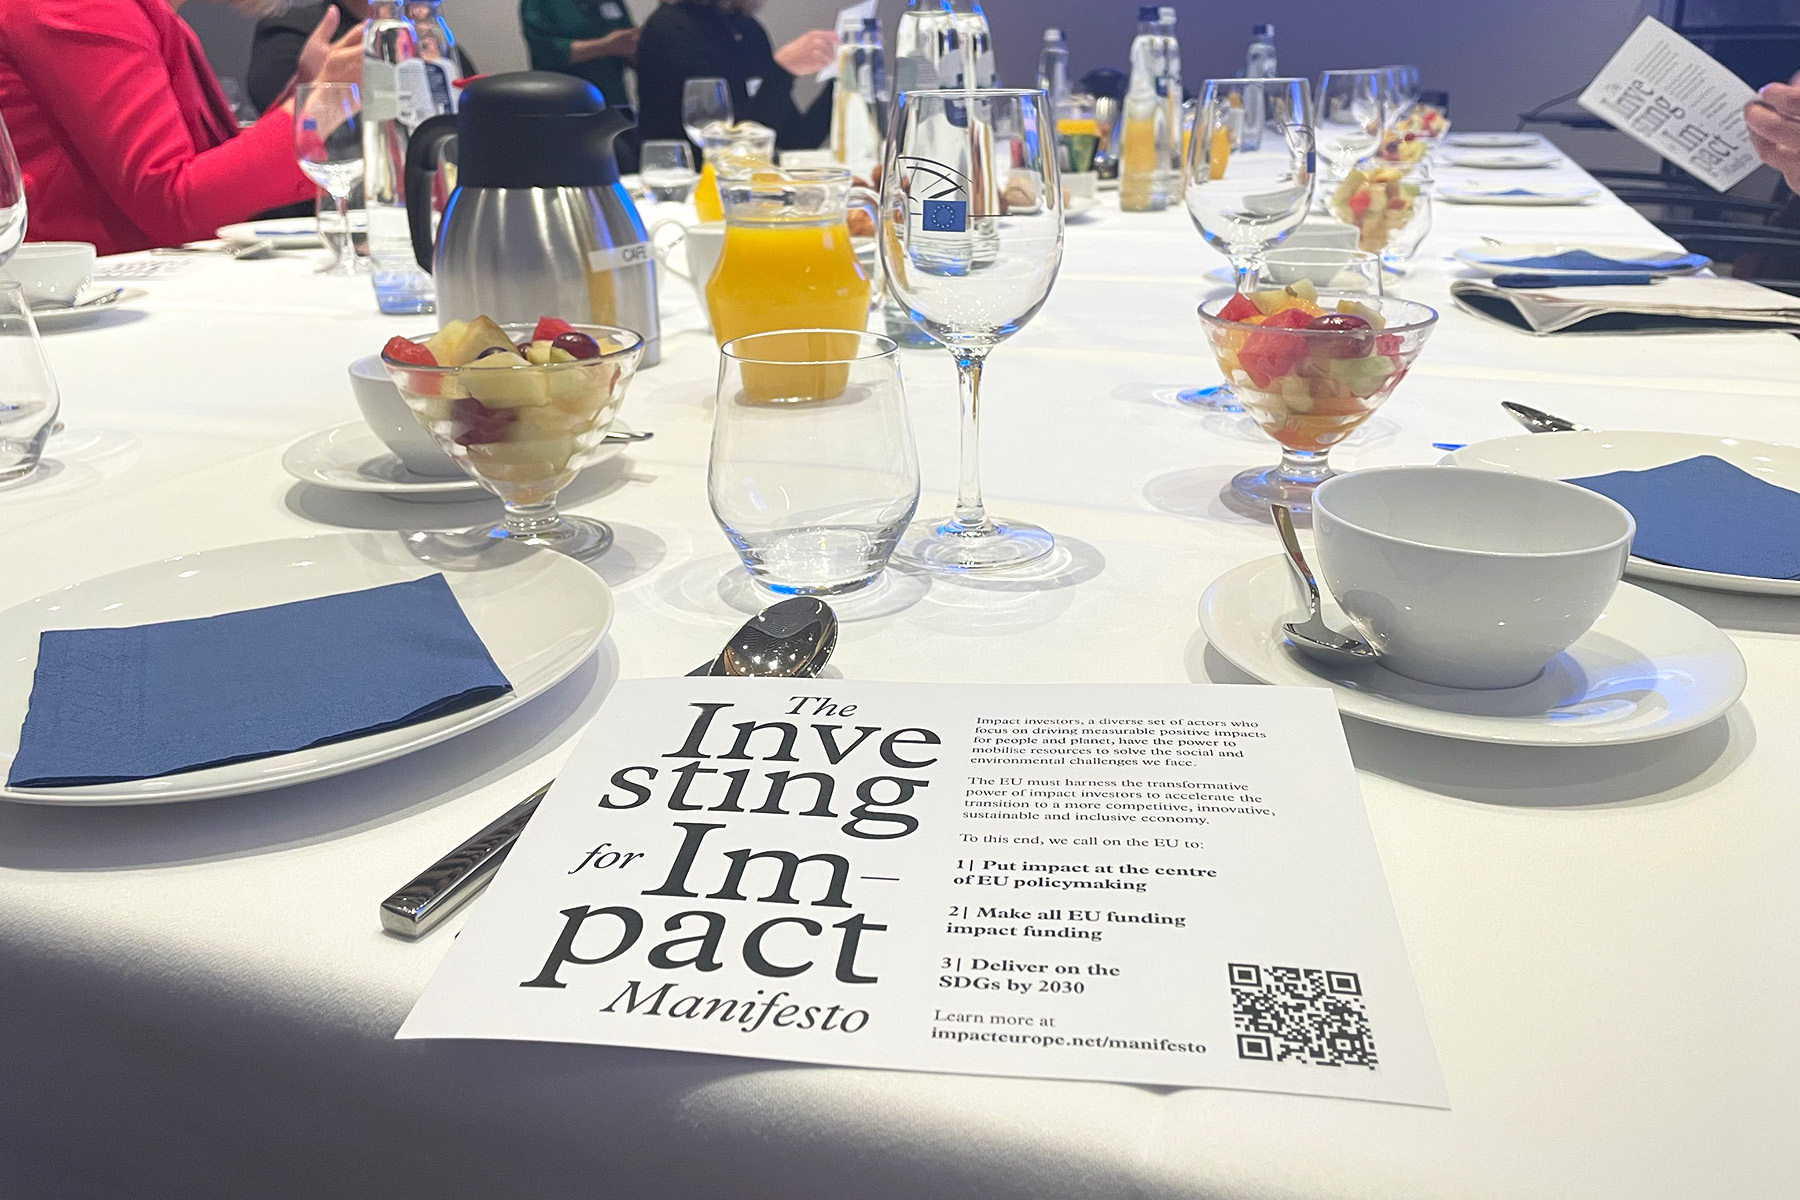 Impact Manifesto on the table at the European Parliament